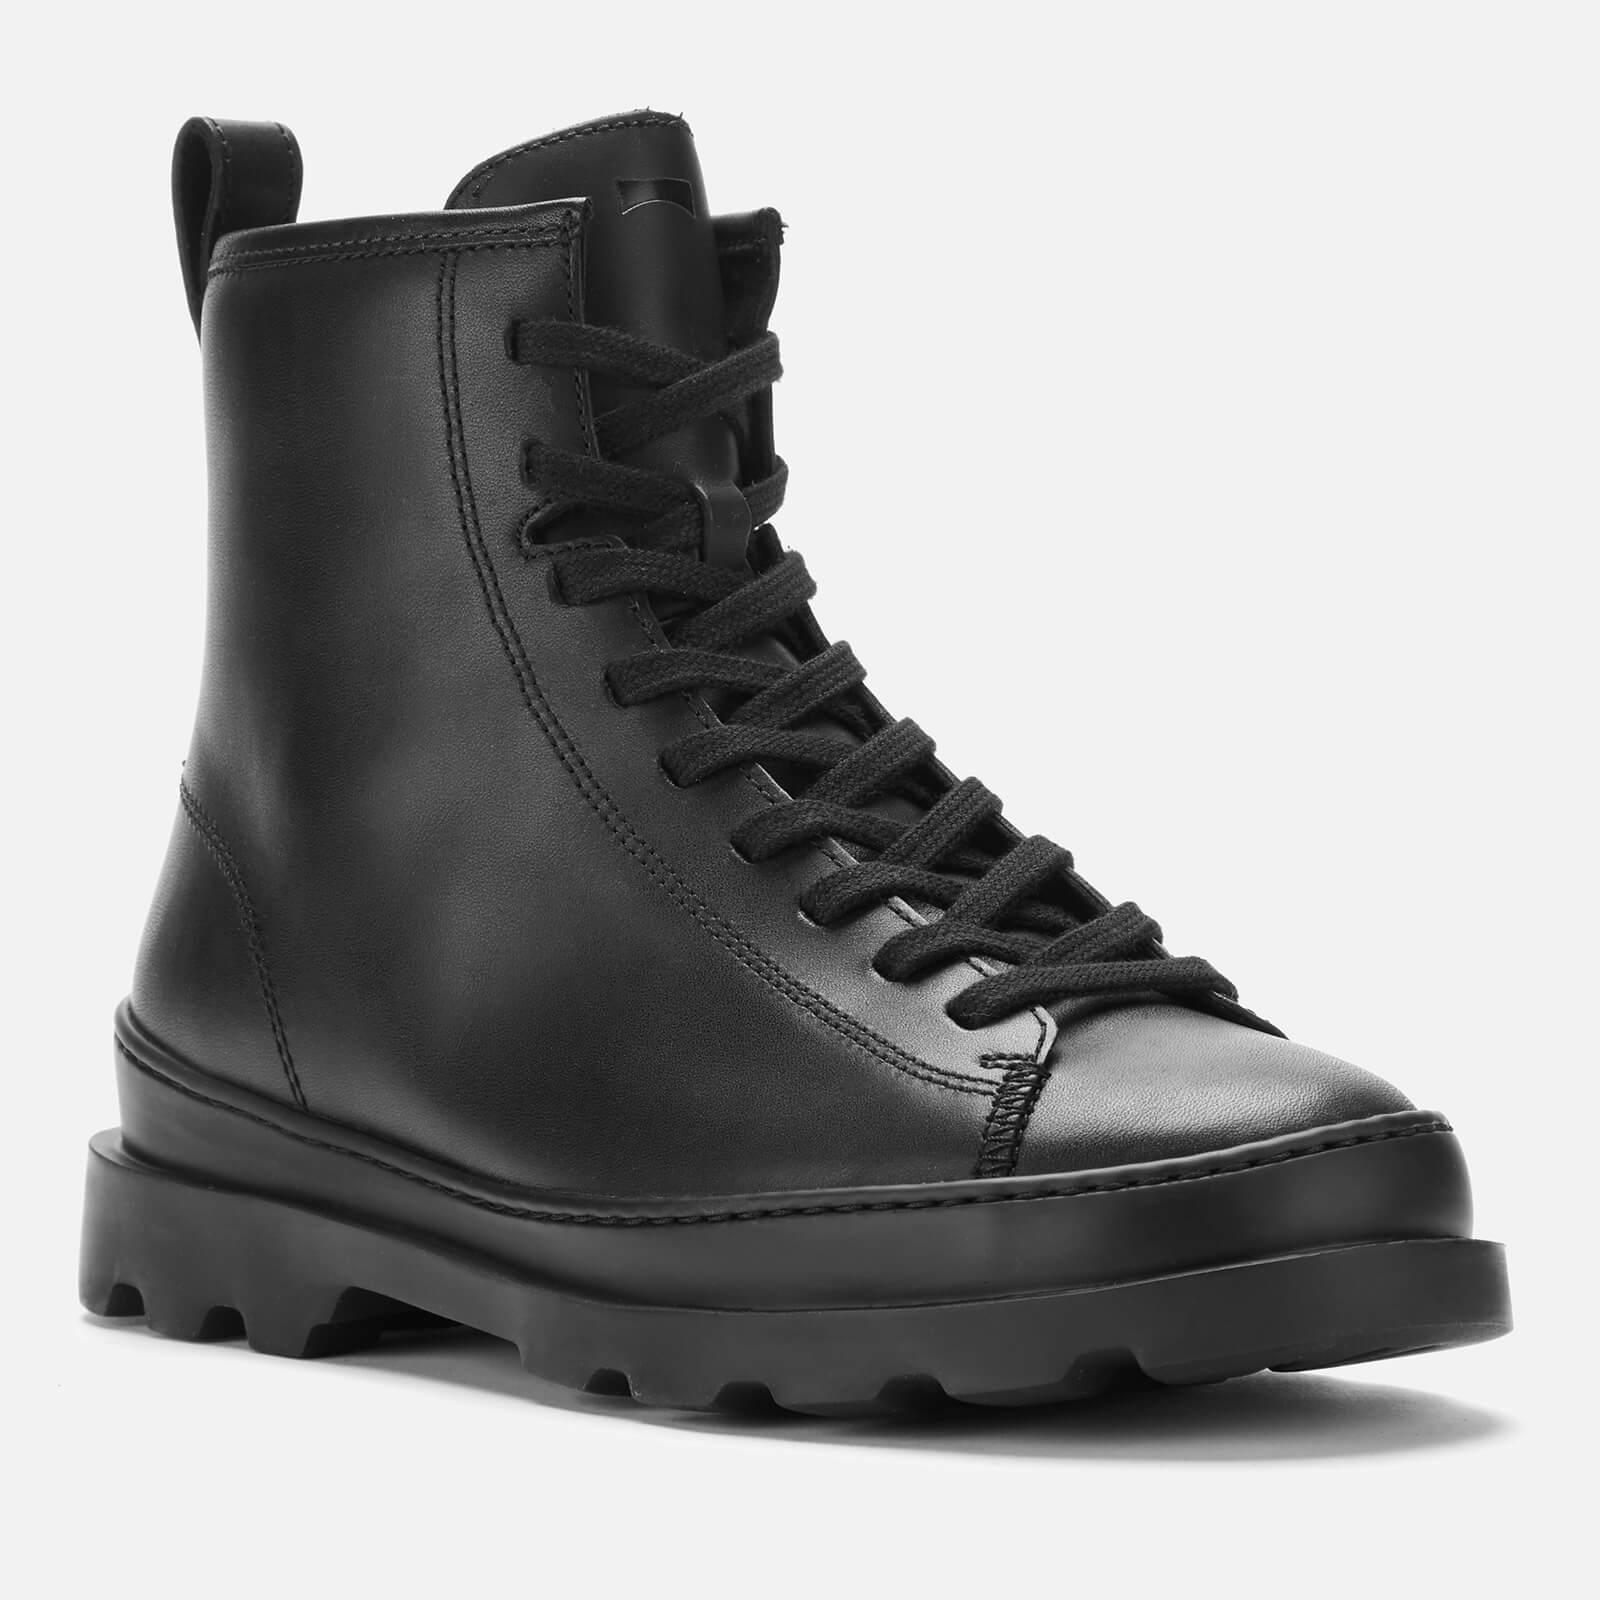 Camper Brutus Leather Lace Up Boots in Black - Lyst